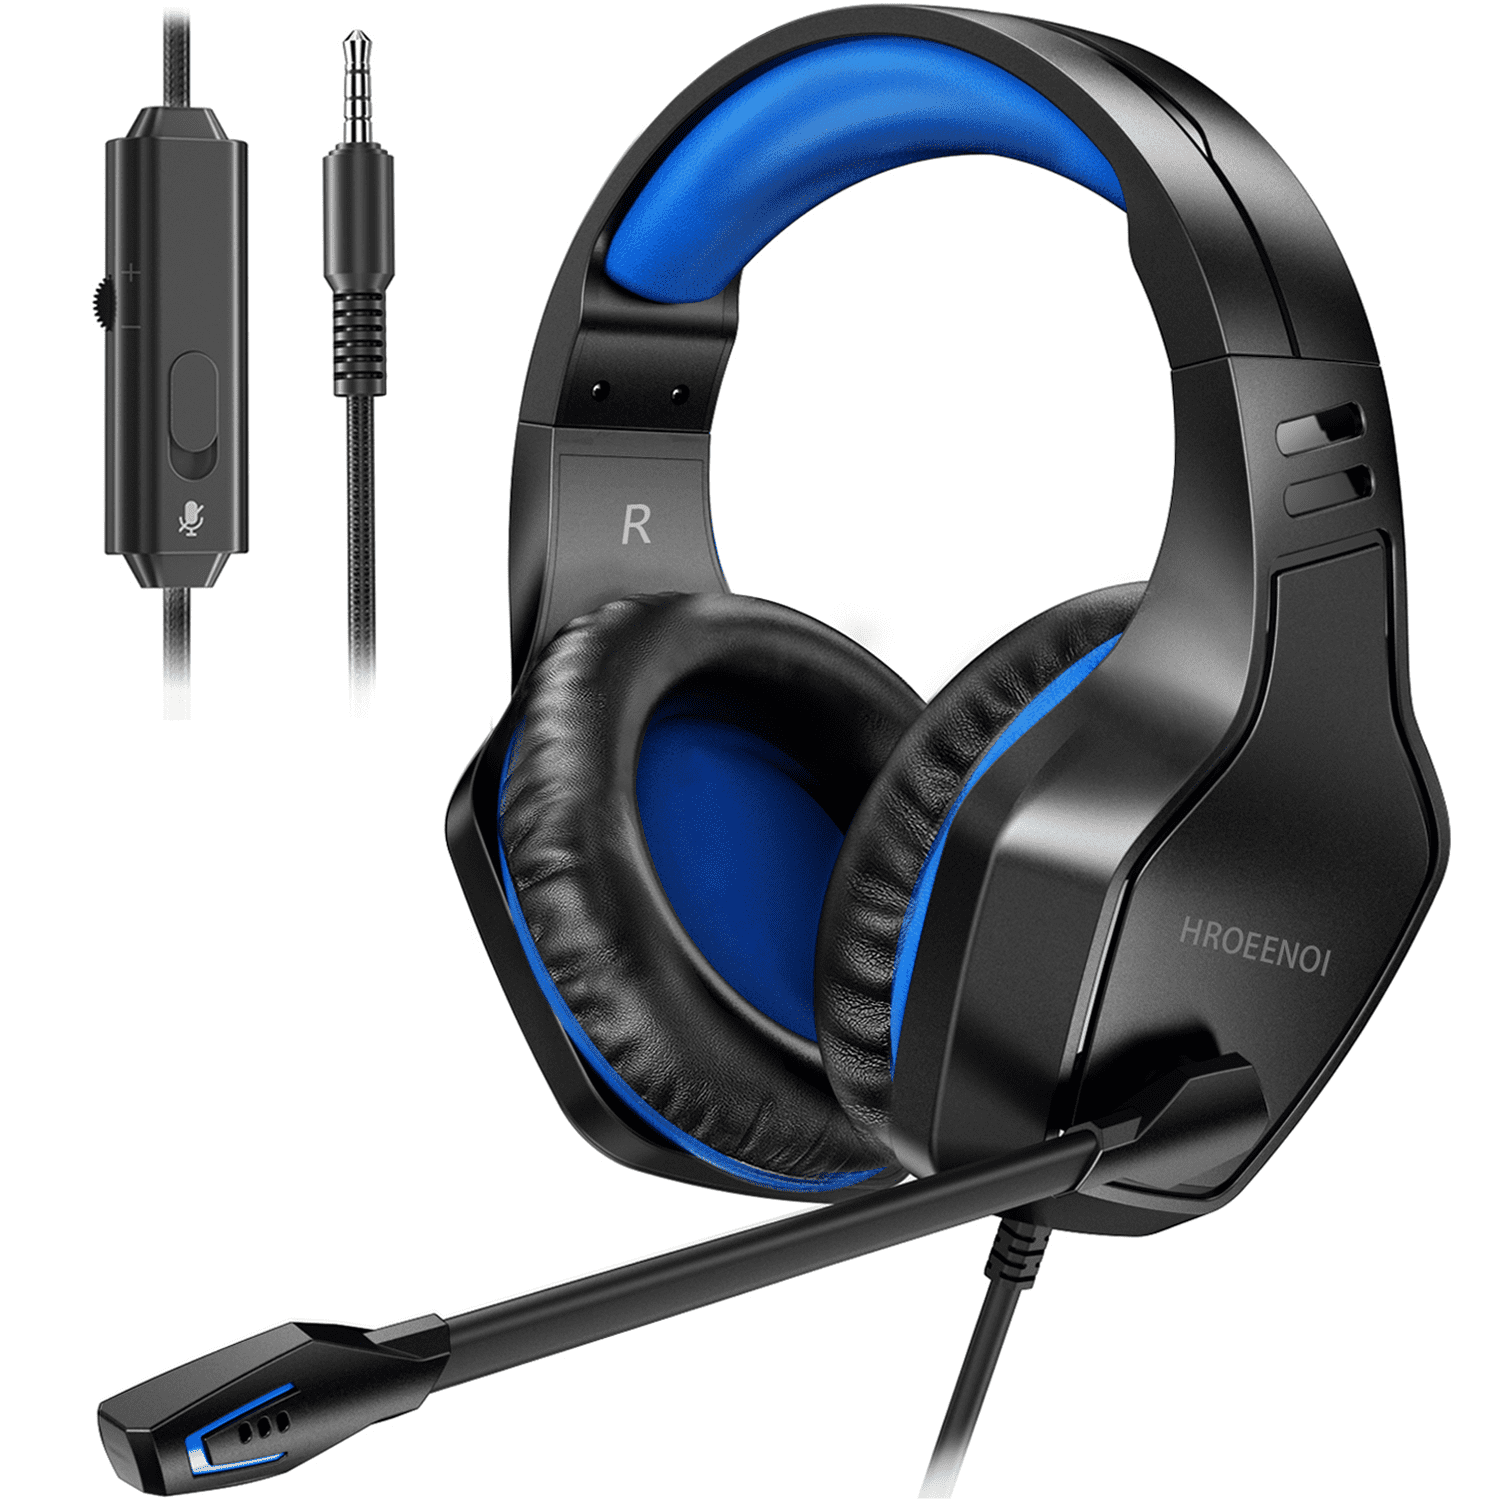 Gaming Headset, Microphone Headset for One, PS4, PC with Noise Cancelling Mic, Surround Sound Stereo, Wired Connection -